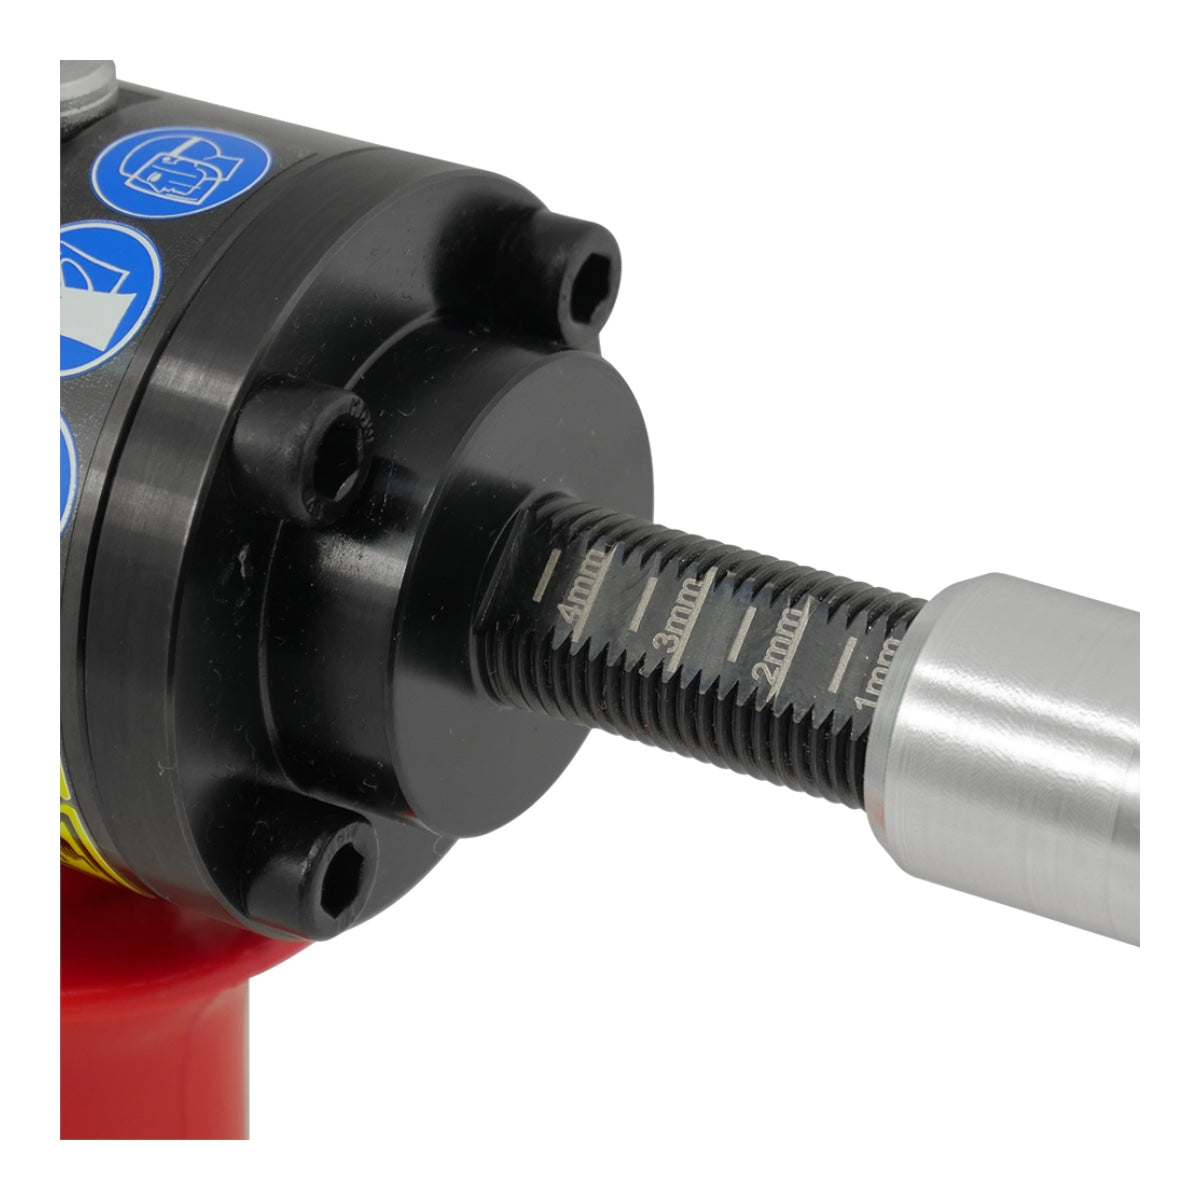 XPull mechanical-hydraulic riveting tool incl. pull adapter M10, left-hand thread